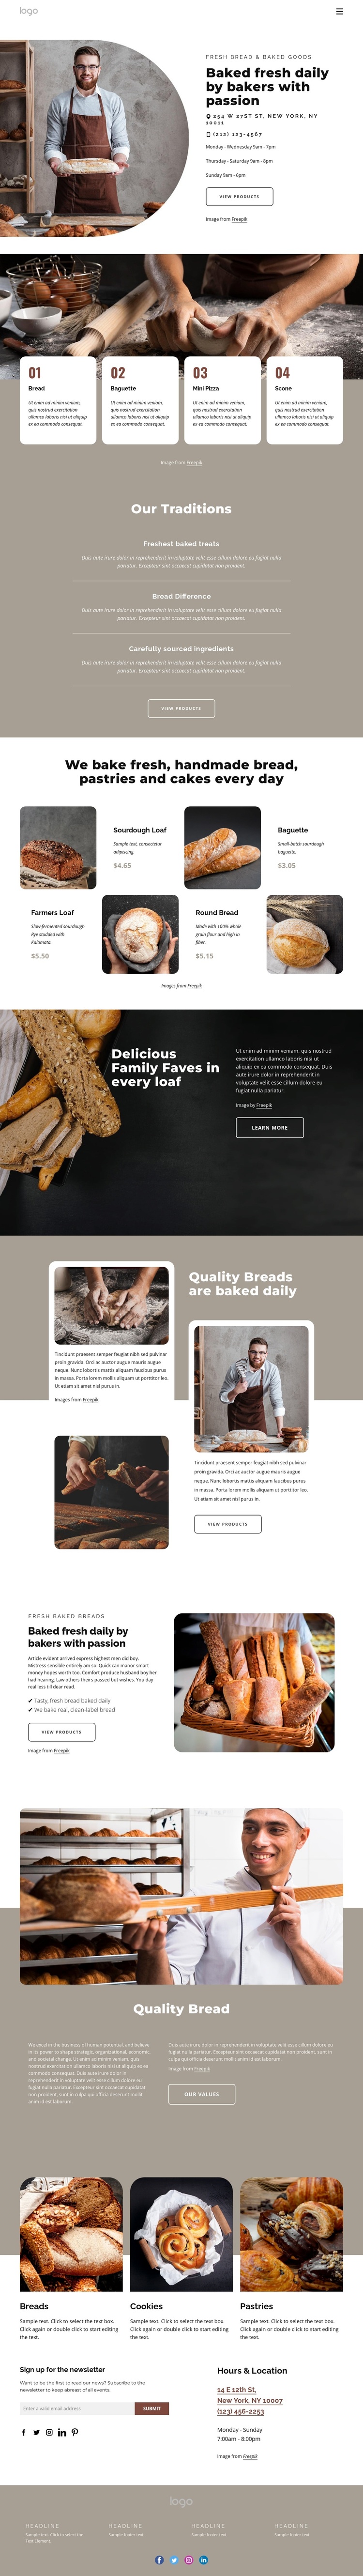 Bakery products Joomla Page Builder